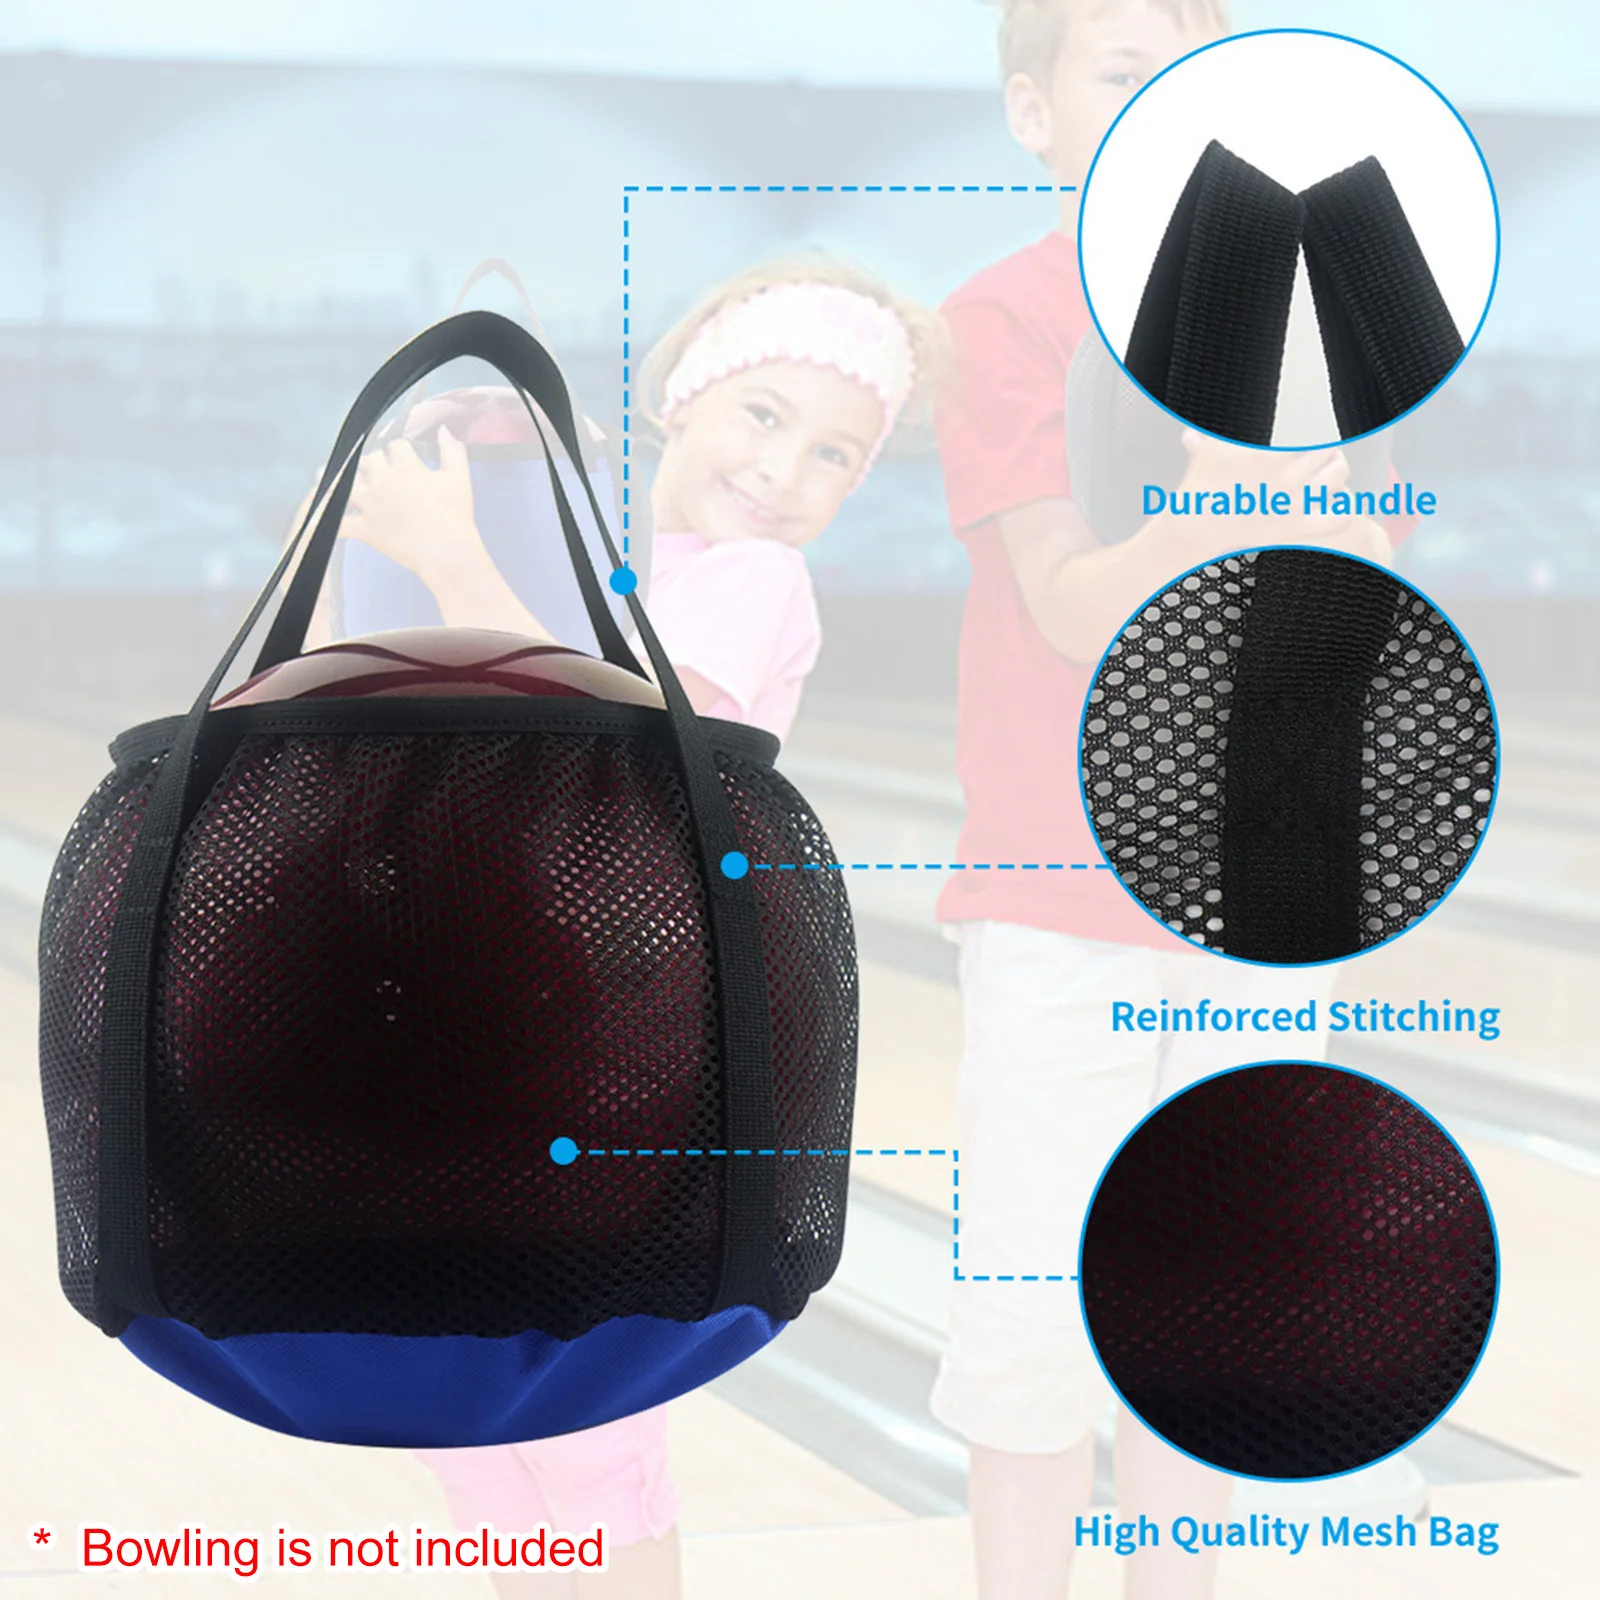 Convenient Bowling Bag Sticky Design As Shown Single Bowling Tote Bag Bowling Rack Small Items Bowling Tote Bag 2 5 inch internal dual slot tool free hard disk rack support two 2 5 inch sata hdd ssd safety lock design support hot plug